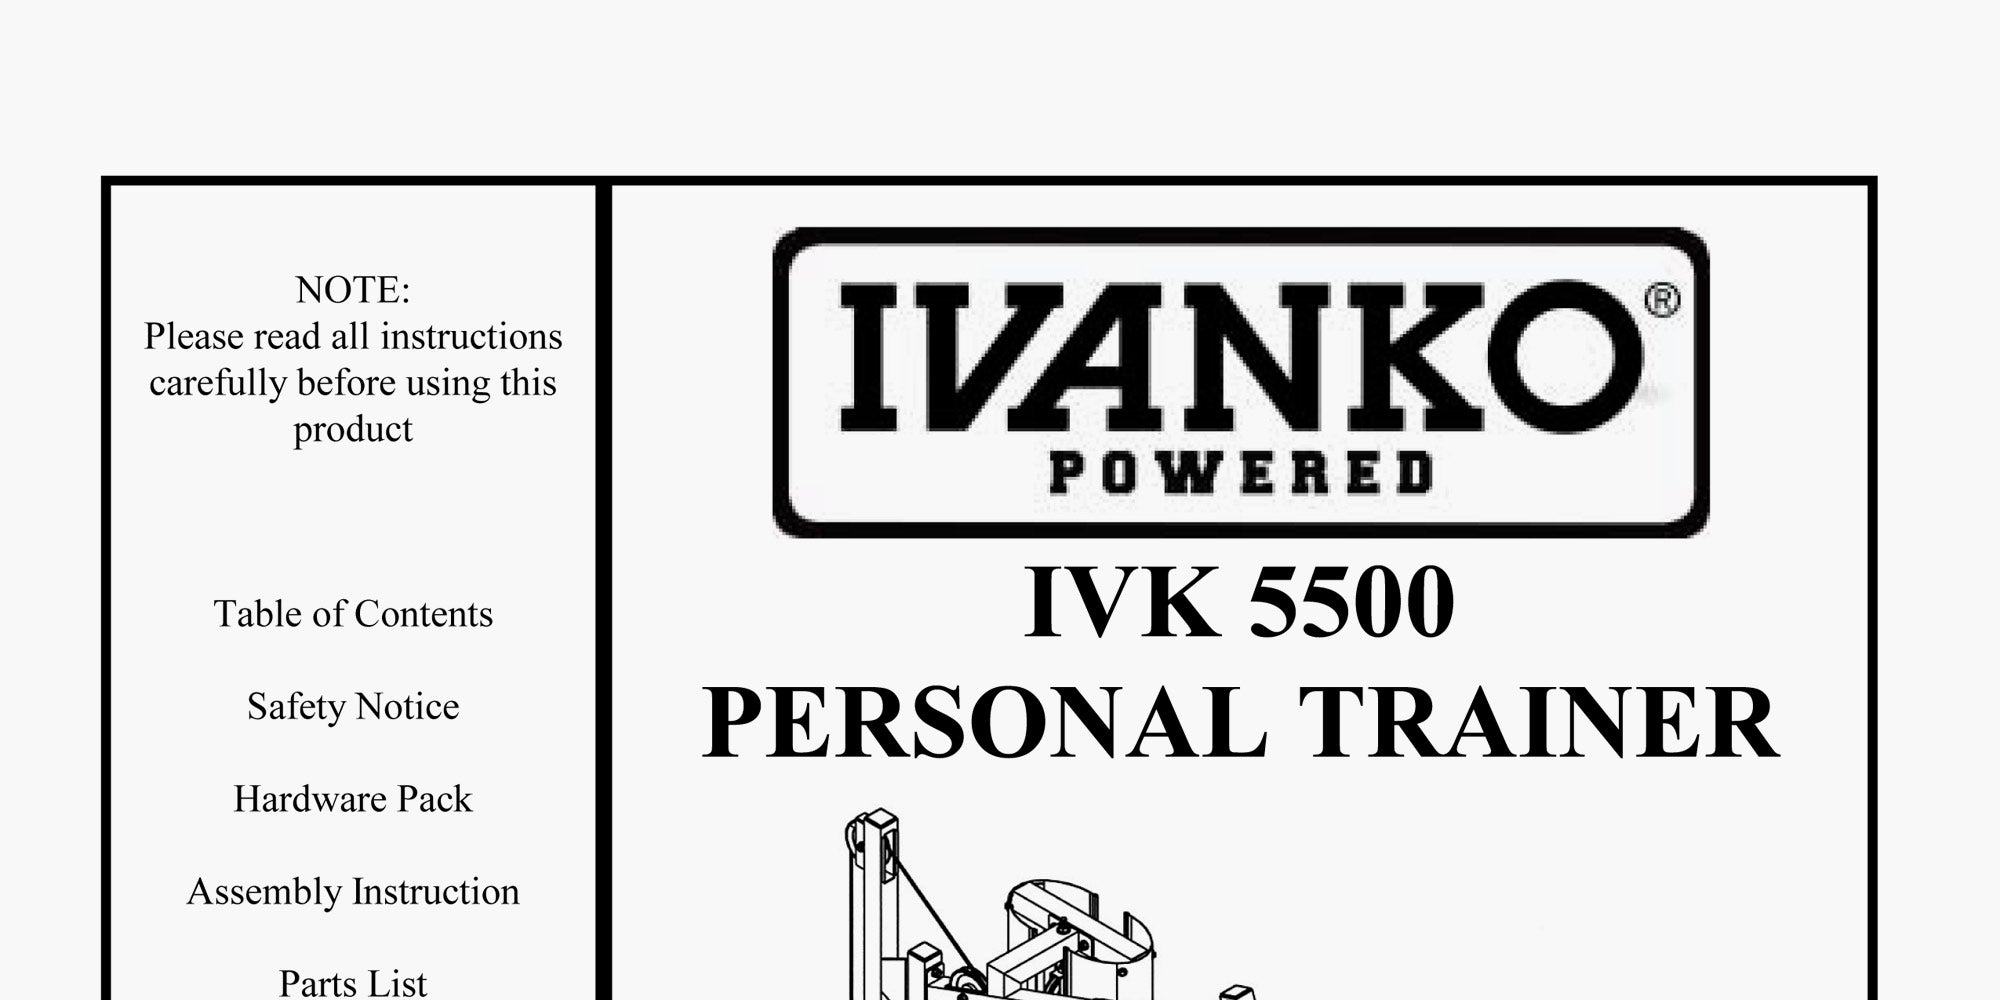 IVK-5500 Personal Trainer (Owner's Manual) – Ivanko Barbell Company